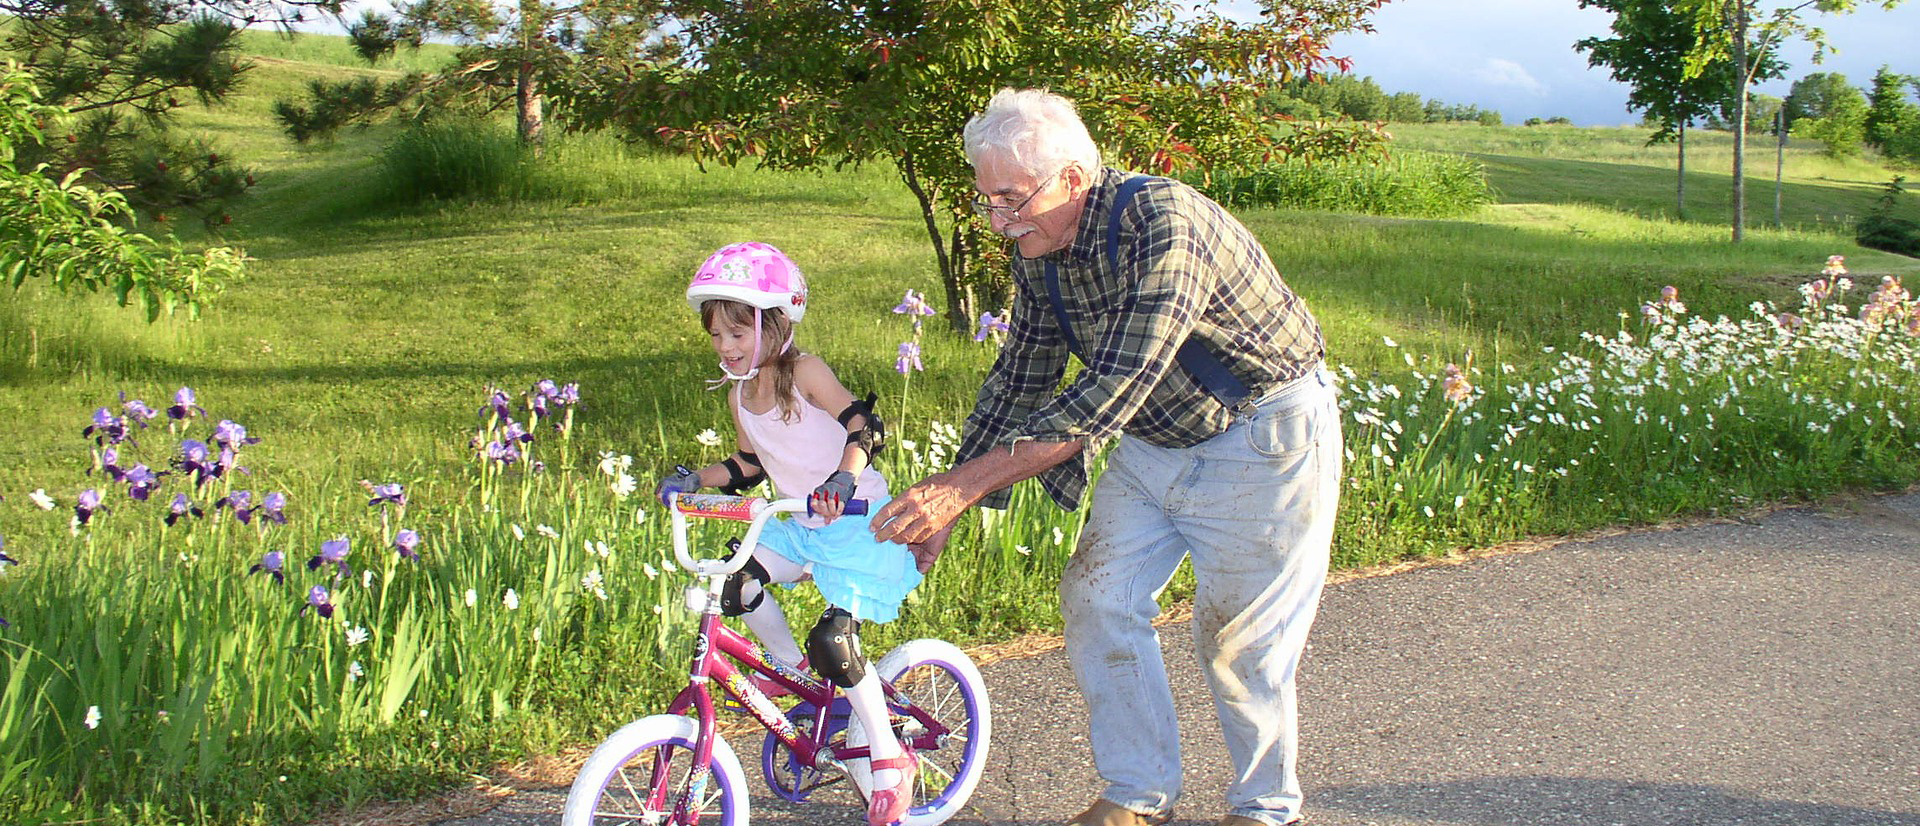 Grandfather teaching granddaughter to ride a bicycle